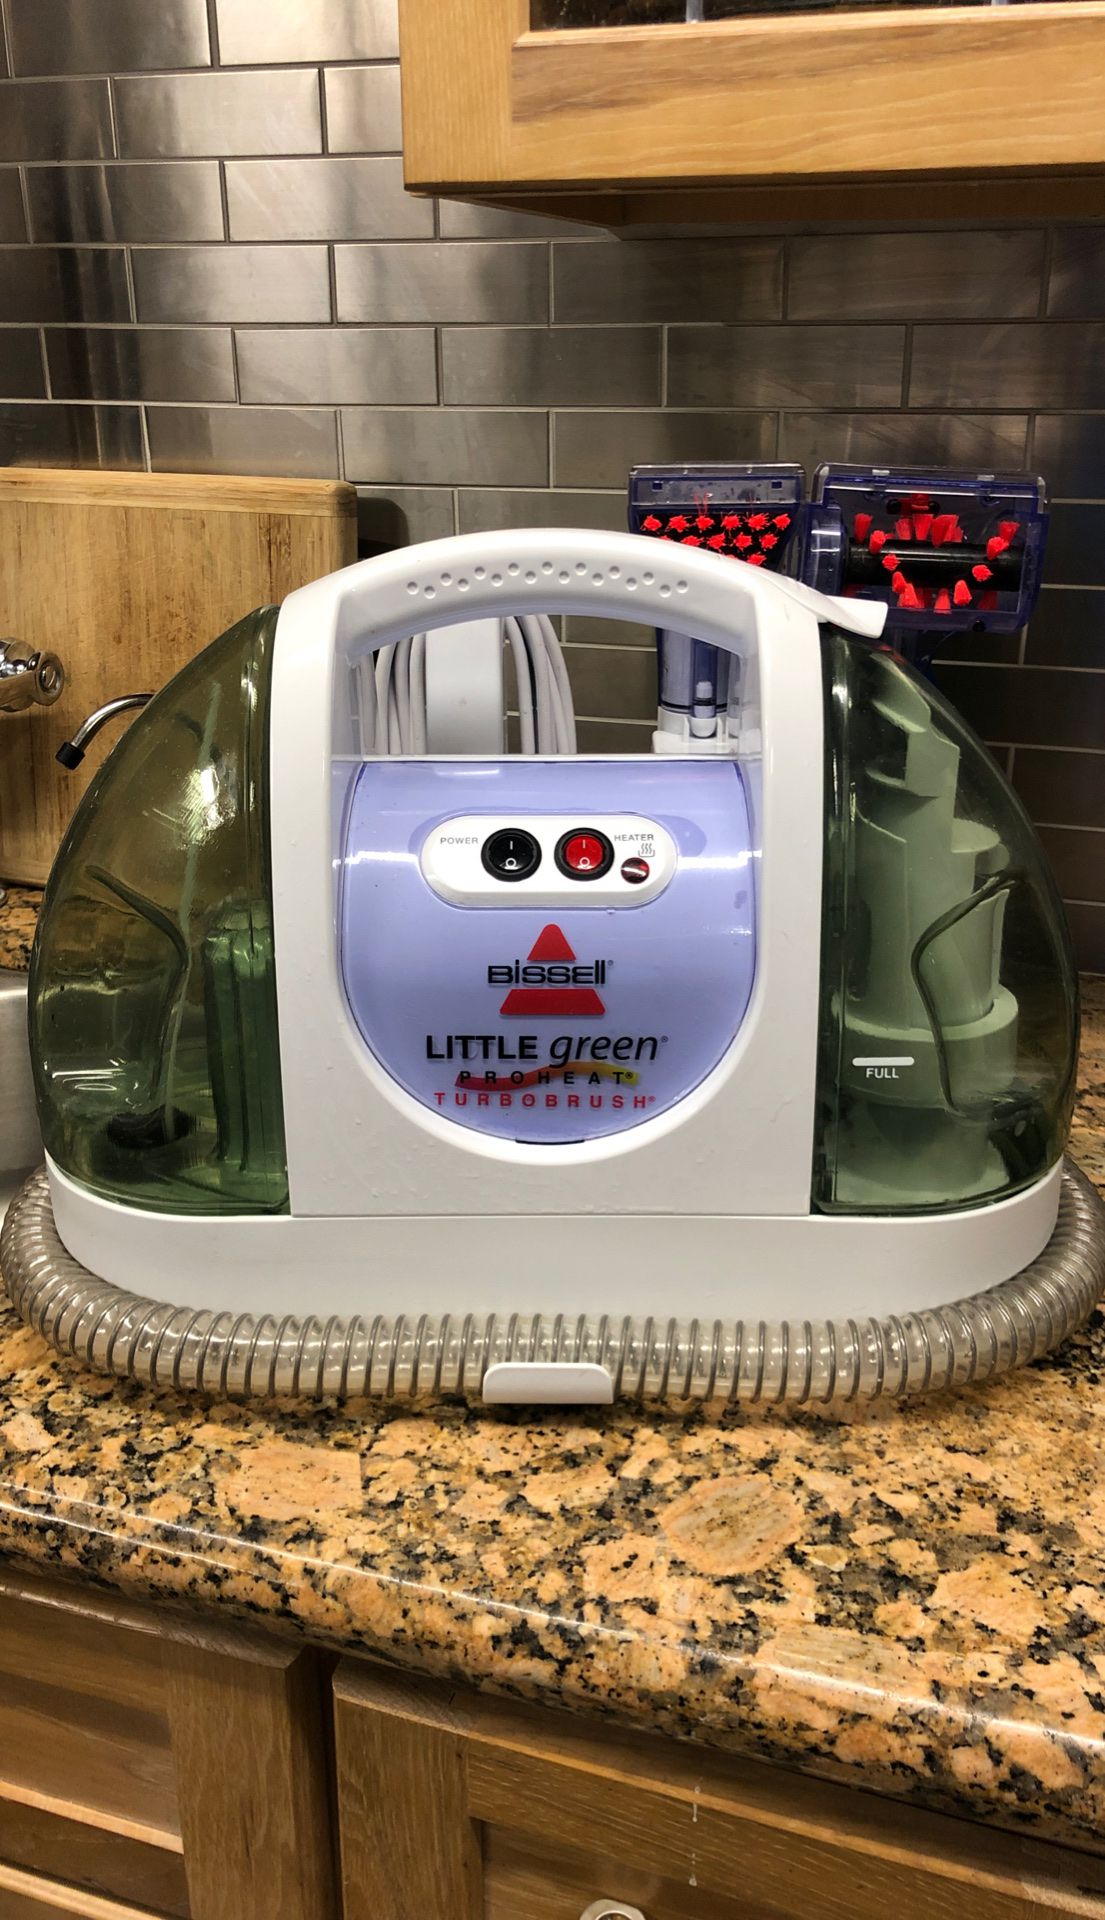 Bissell Little green turbo wash heated vacuum